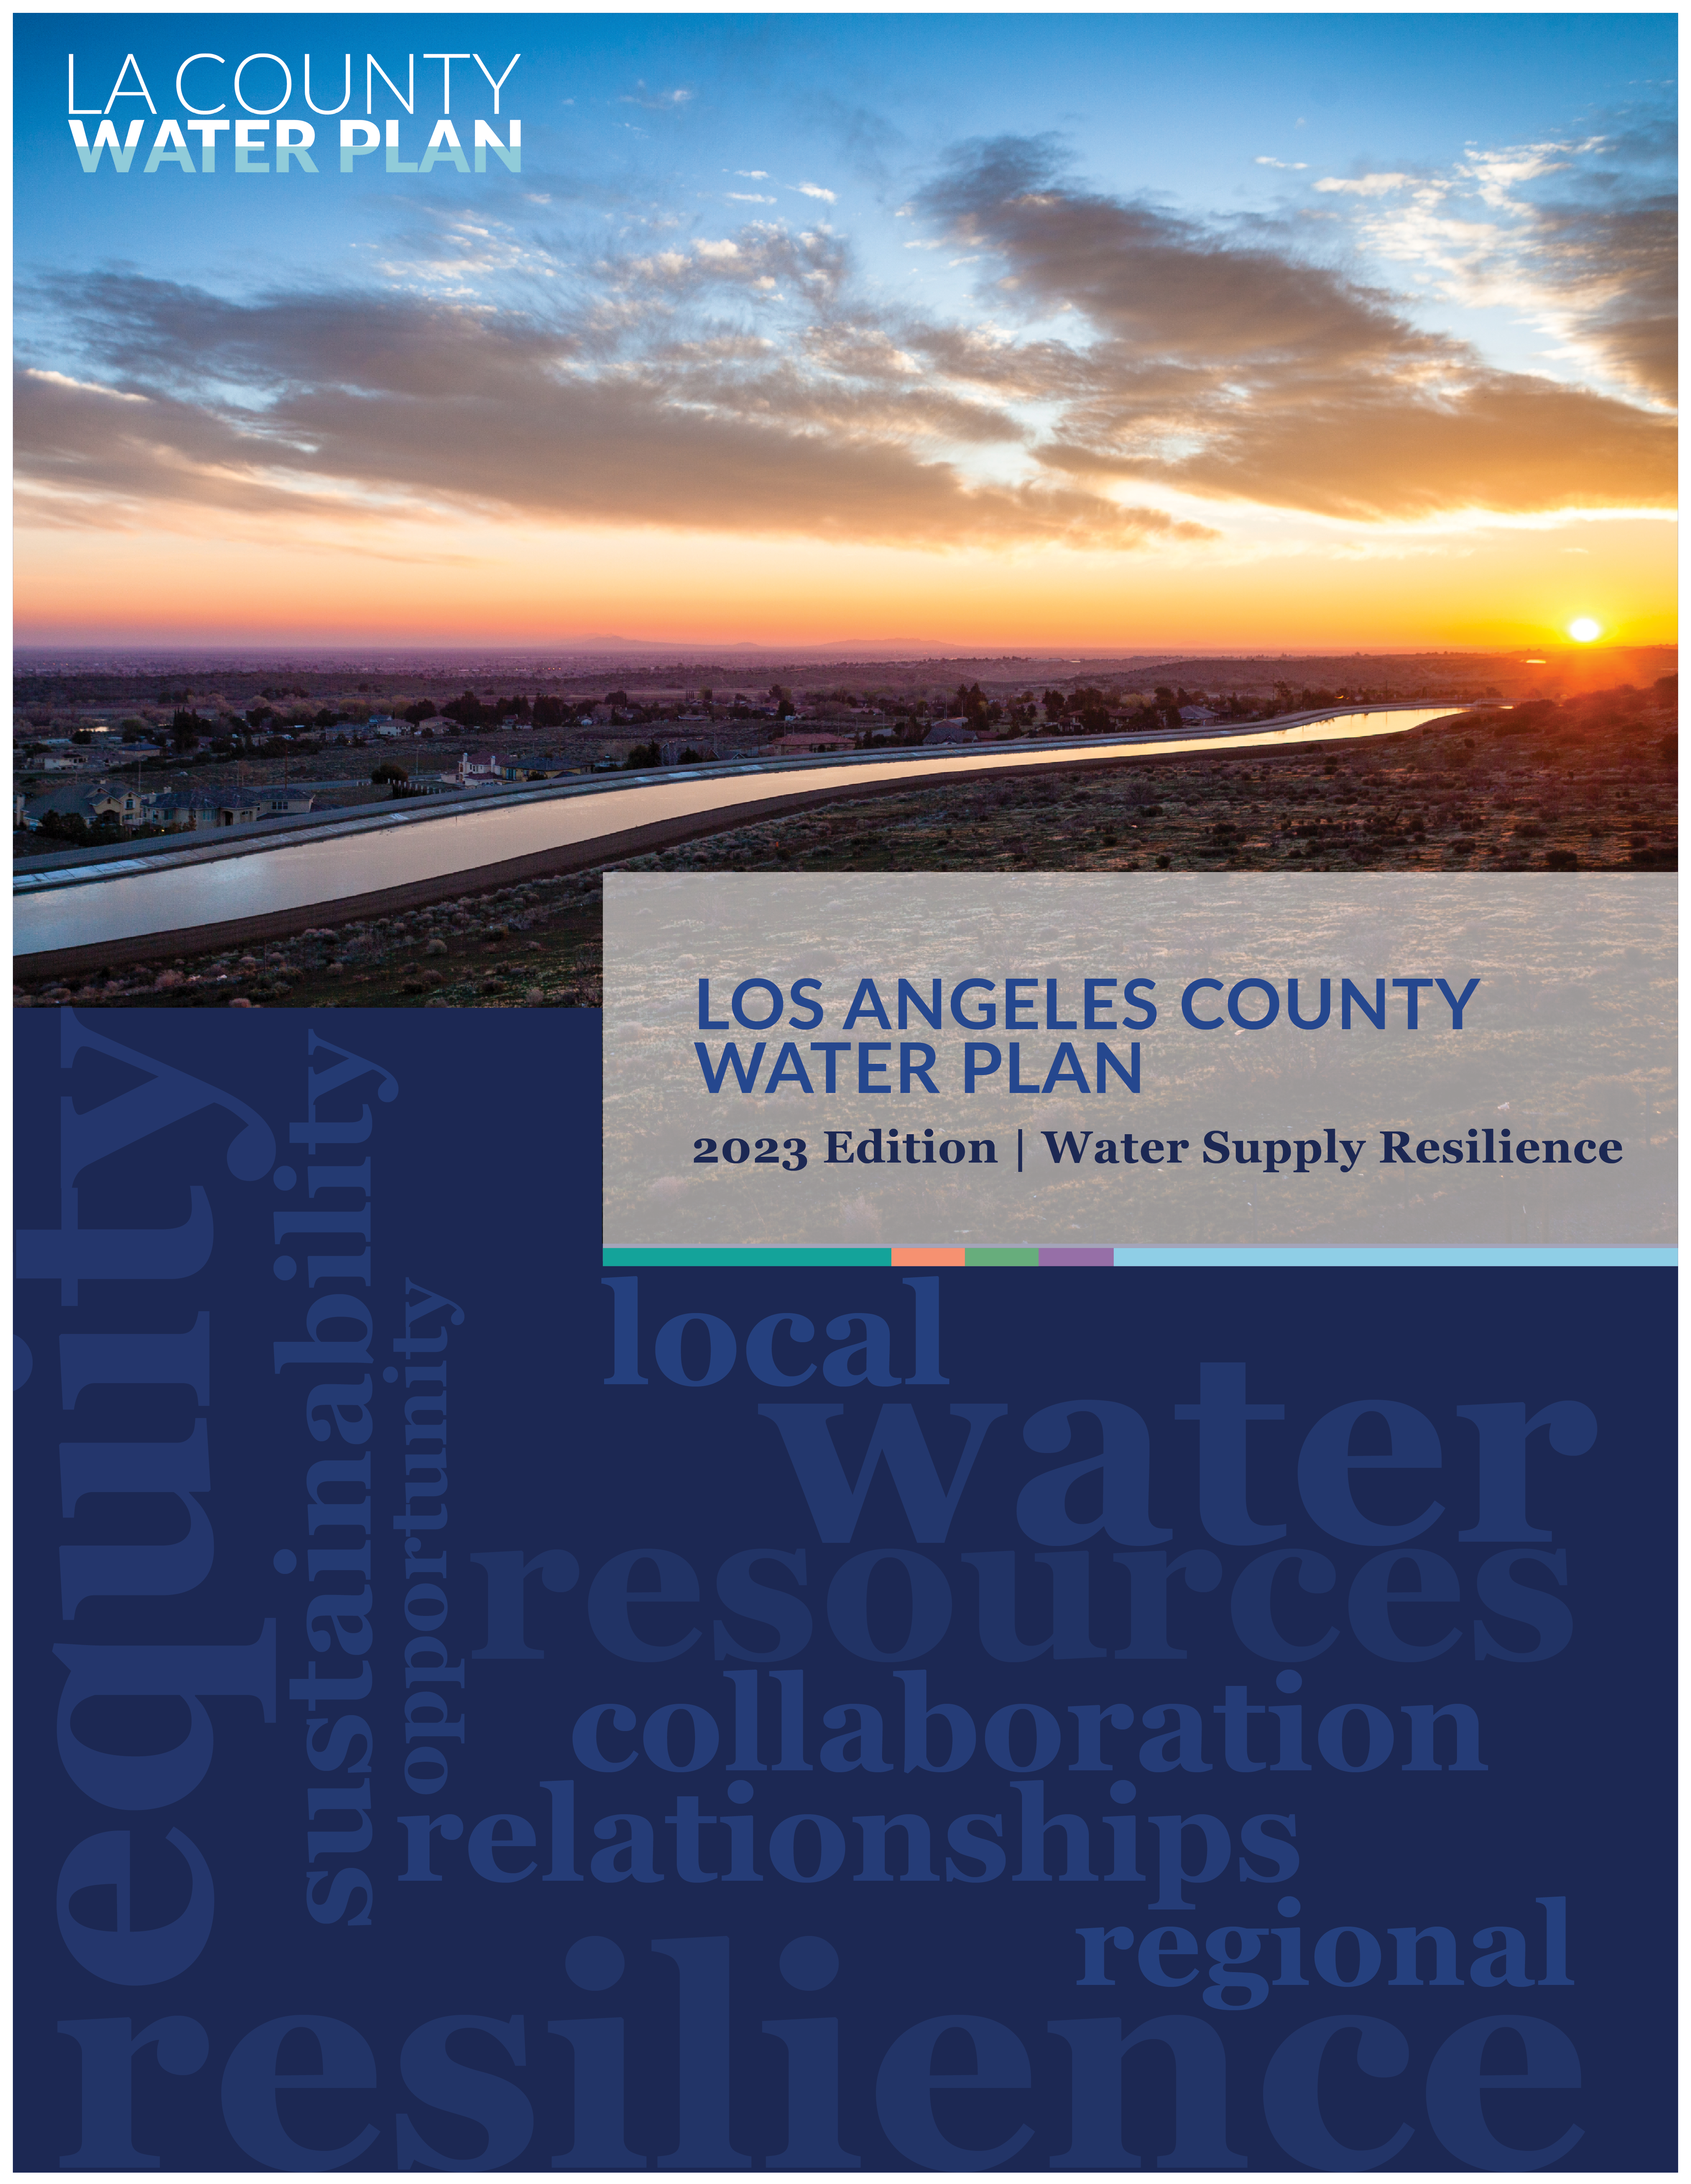 Thumbnail of the LA County Water Plan.  The top half of the cover has a picture of a sunset a canal and the LA County Water Plan logo in the top left corner. The bottom half of the cover has words that describe the LA County Water Plan.   